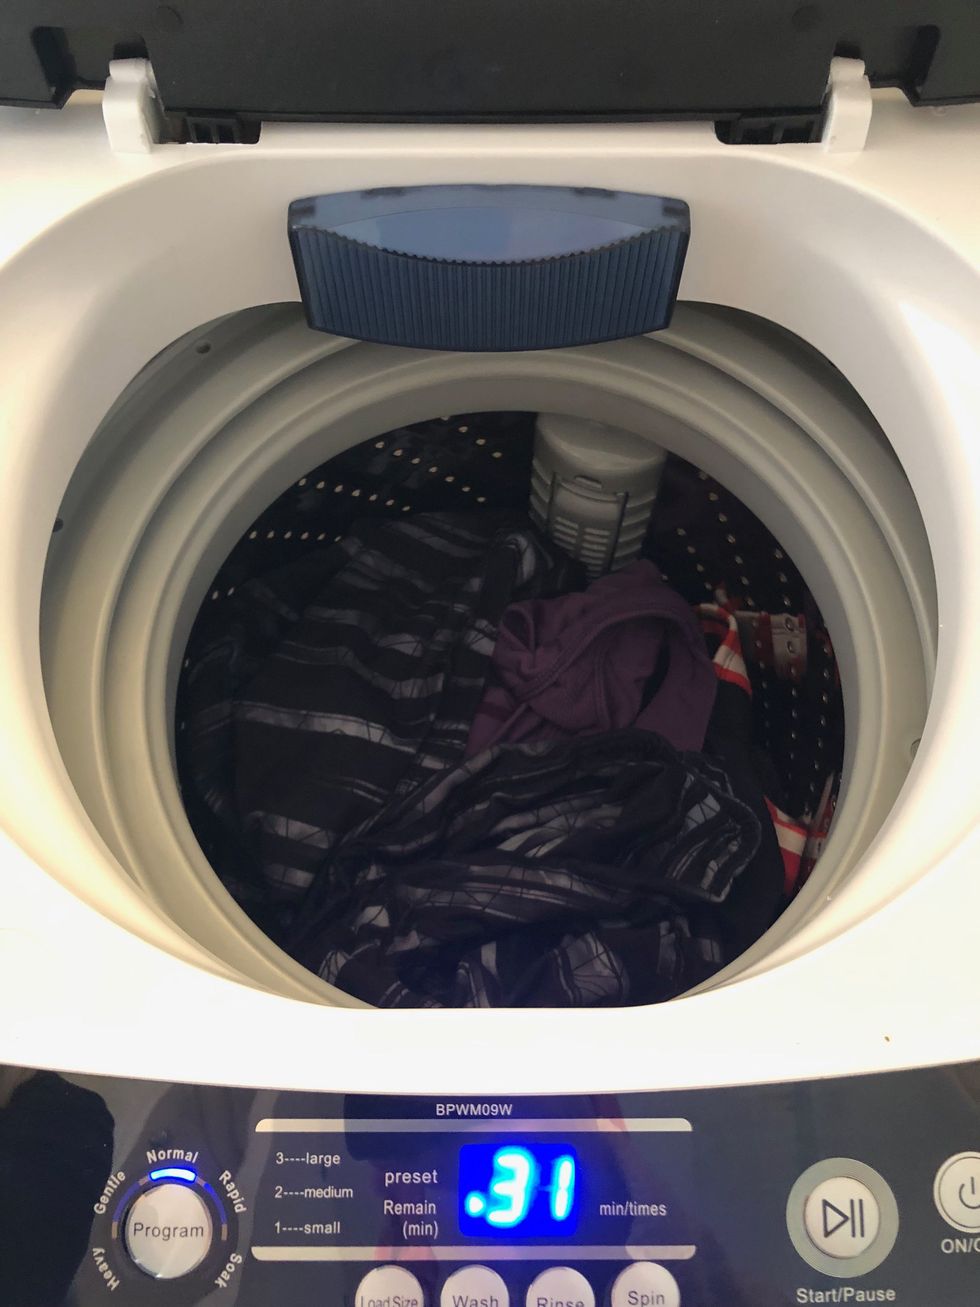 Best Portable Laundry Machine: Top Compact Home Washer/Dryer Combos